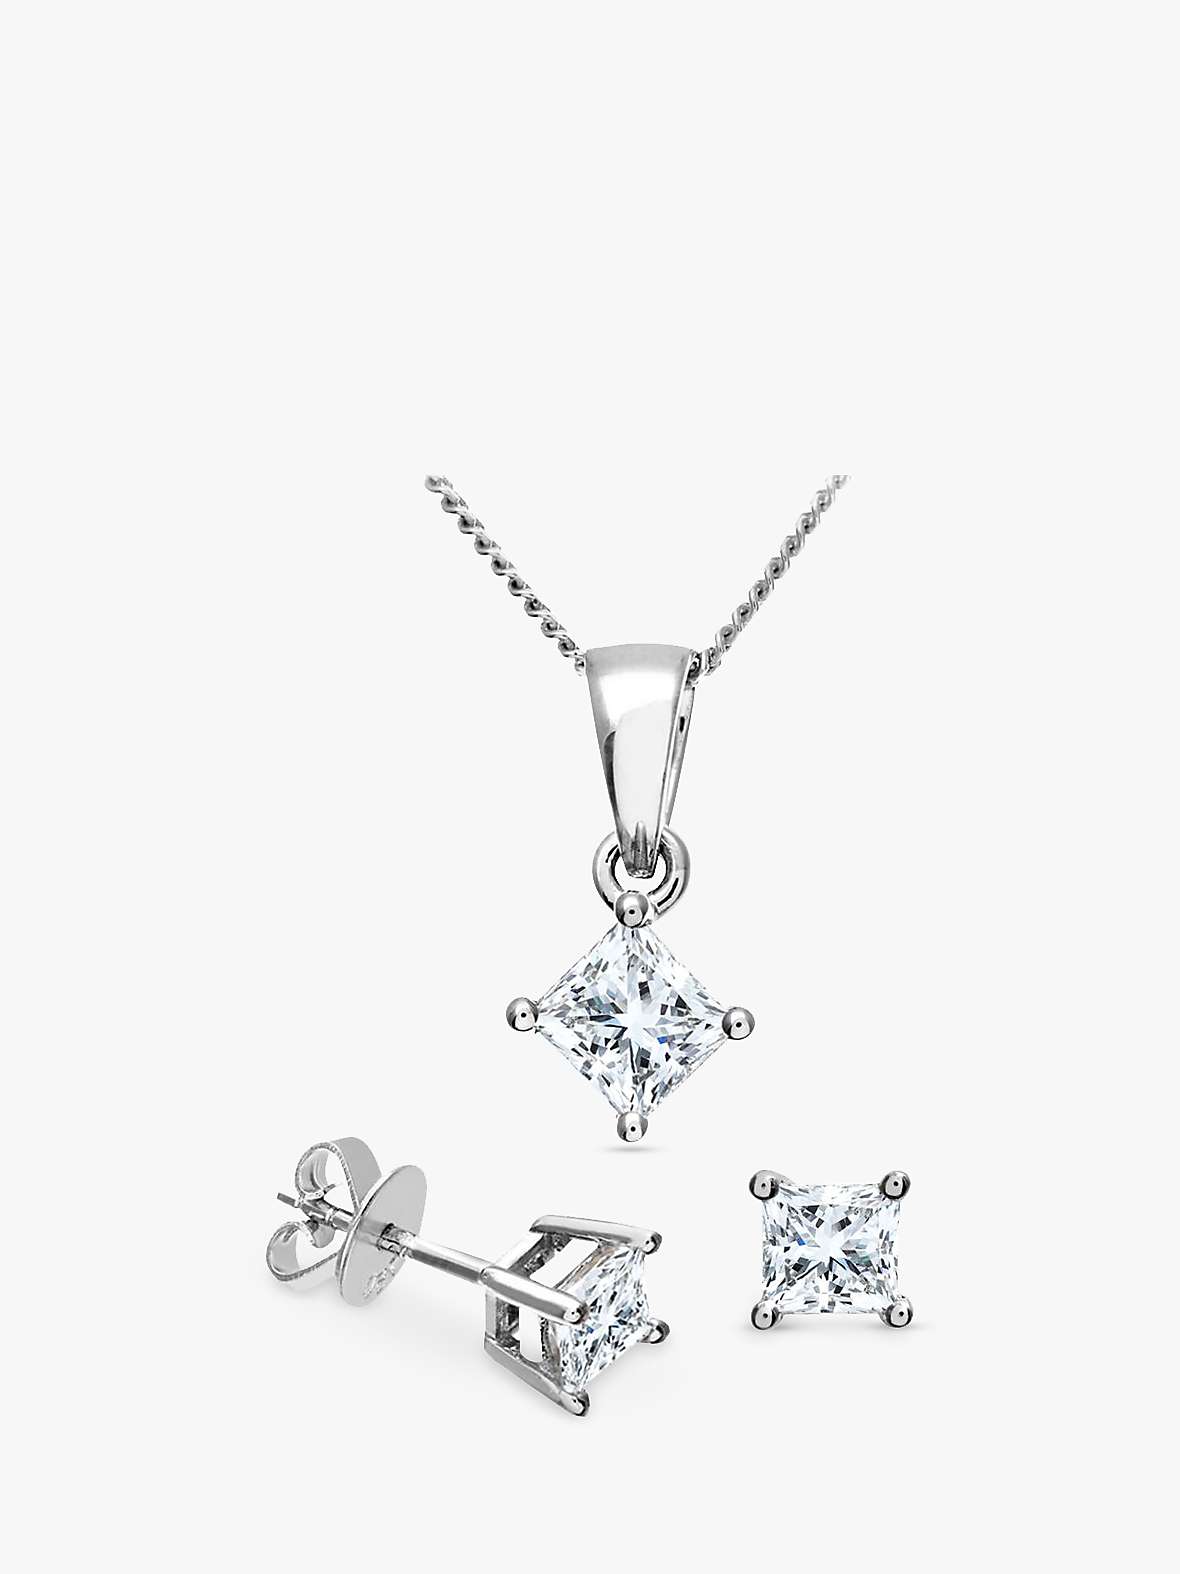 Buy Mogul 18ct White Gold Princess Cut Diamond Solitaire Stud Earrings and Pendant Necklace Jewellery Set, 0.66ct Online at johnlewis.com